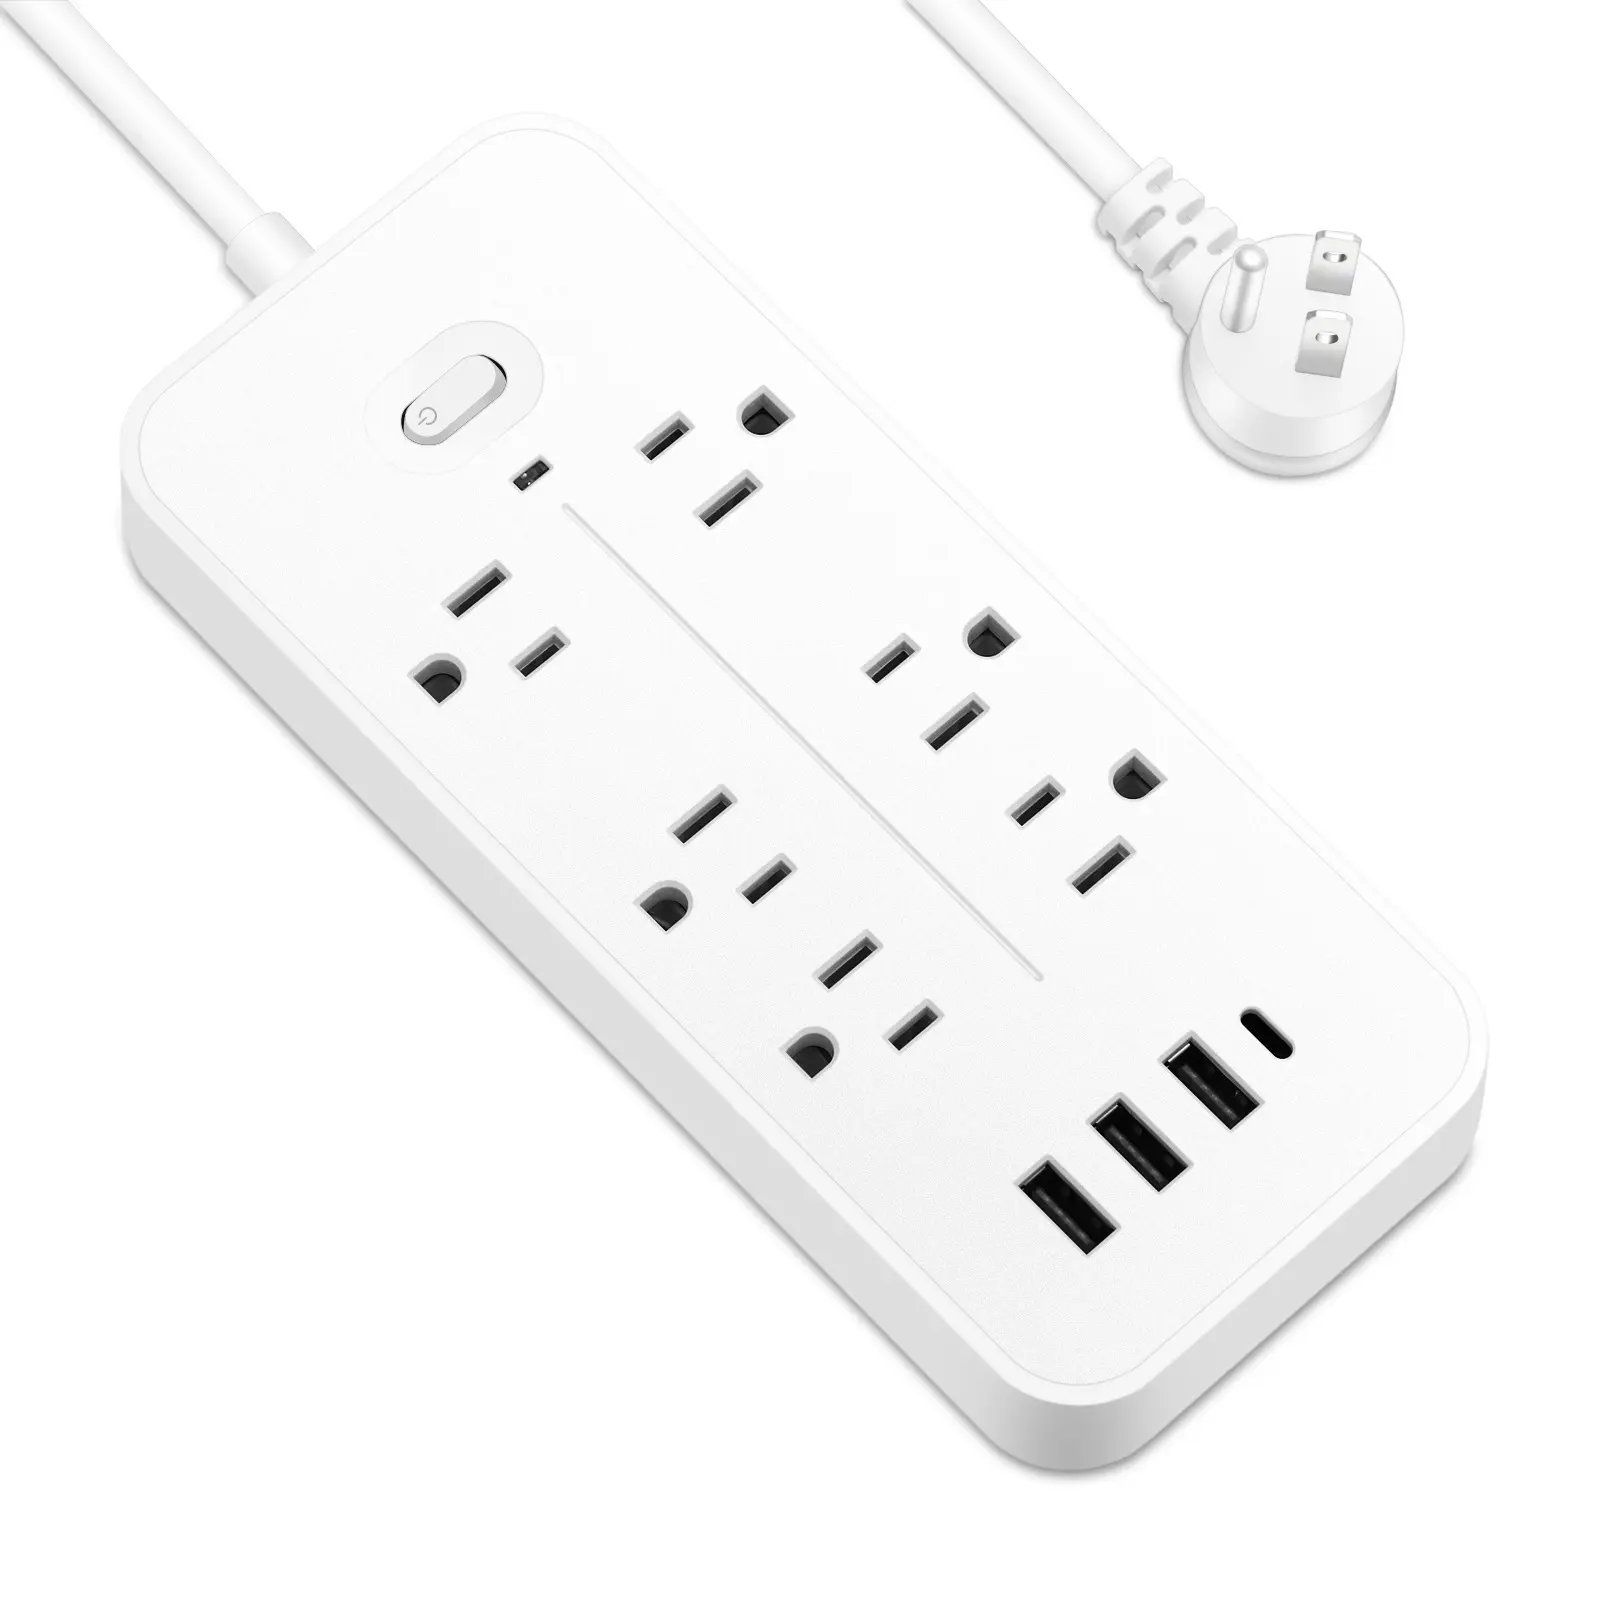 Ons Canada Thailand Mexico Outlet Extender Hotel Office Home Outlet Extension Power Strip 3USB 6 Outlets Plug Adapter 1.2M draden